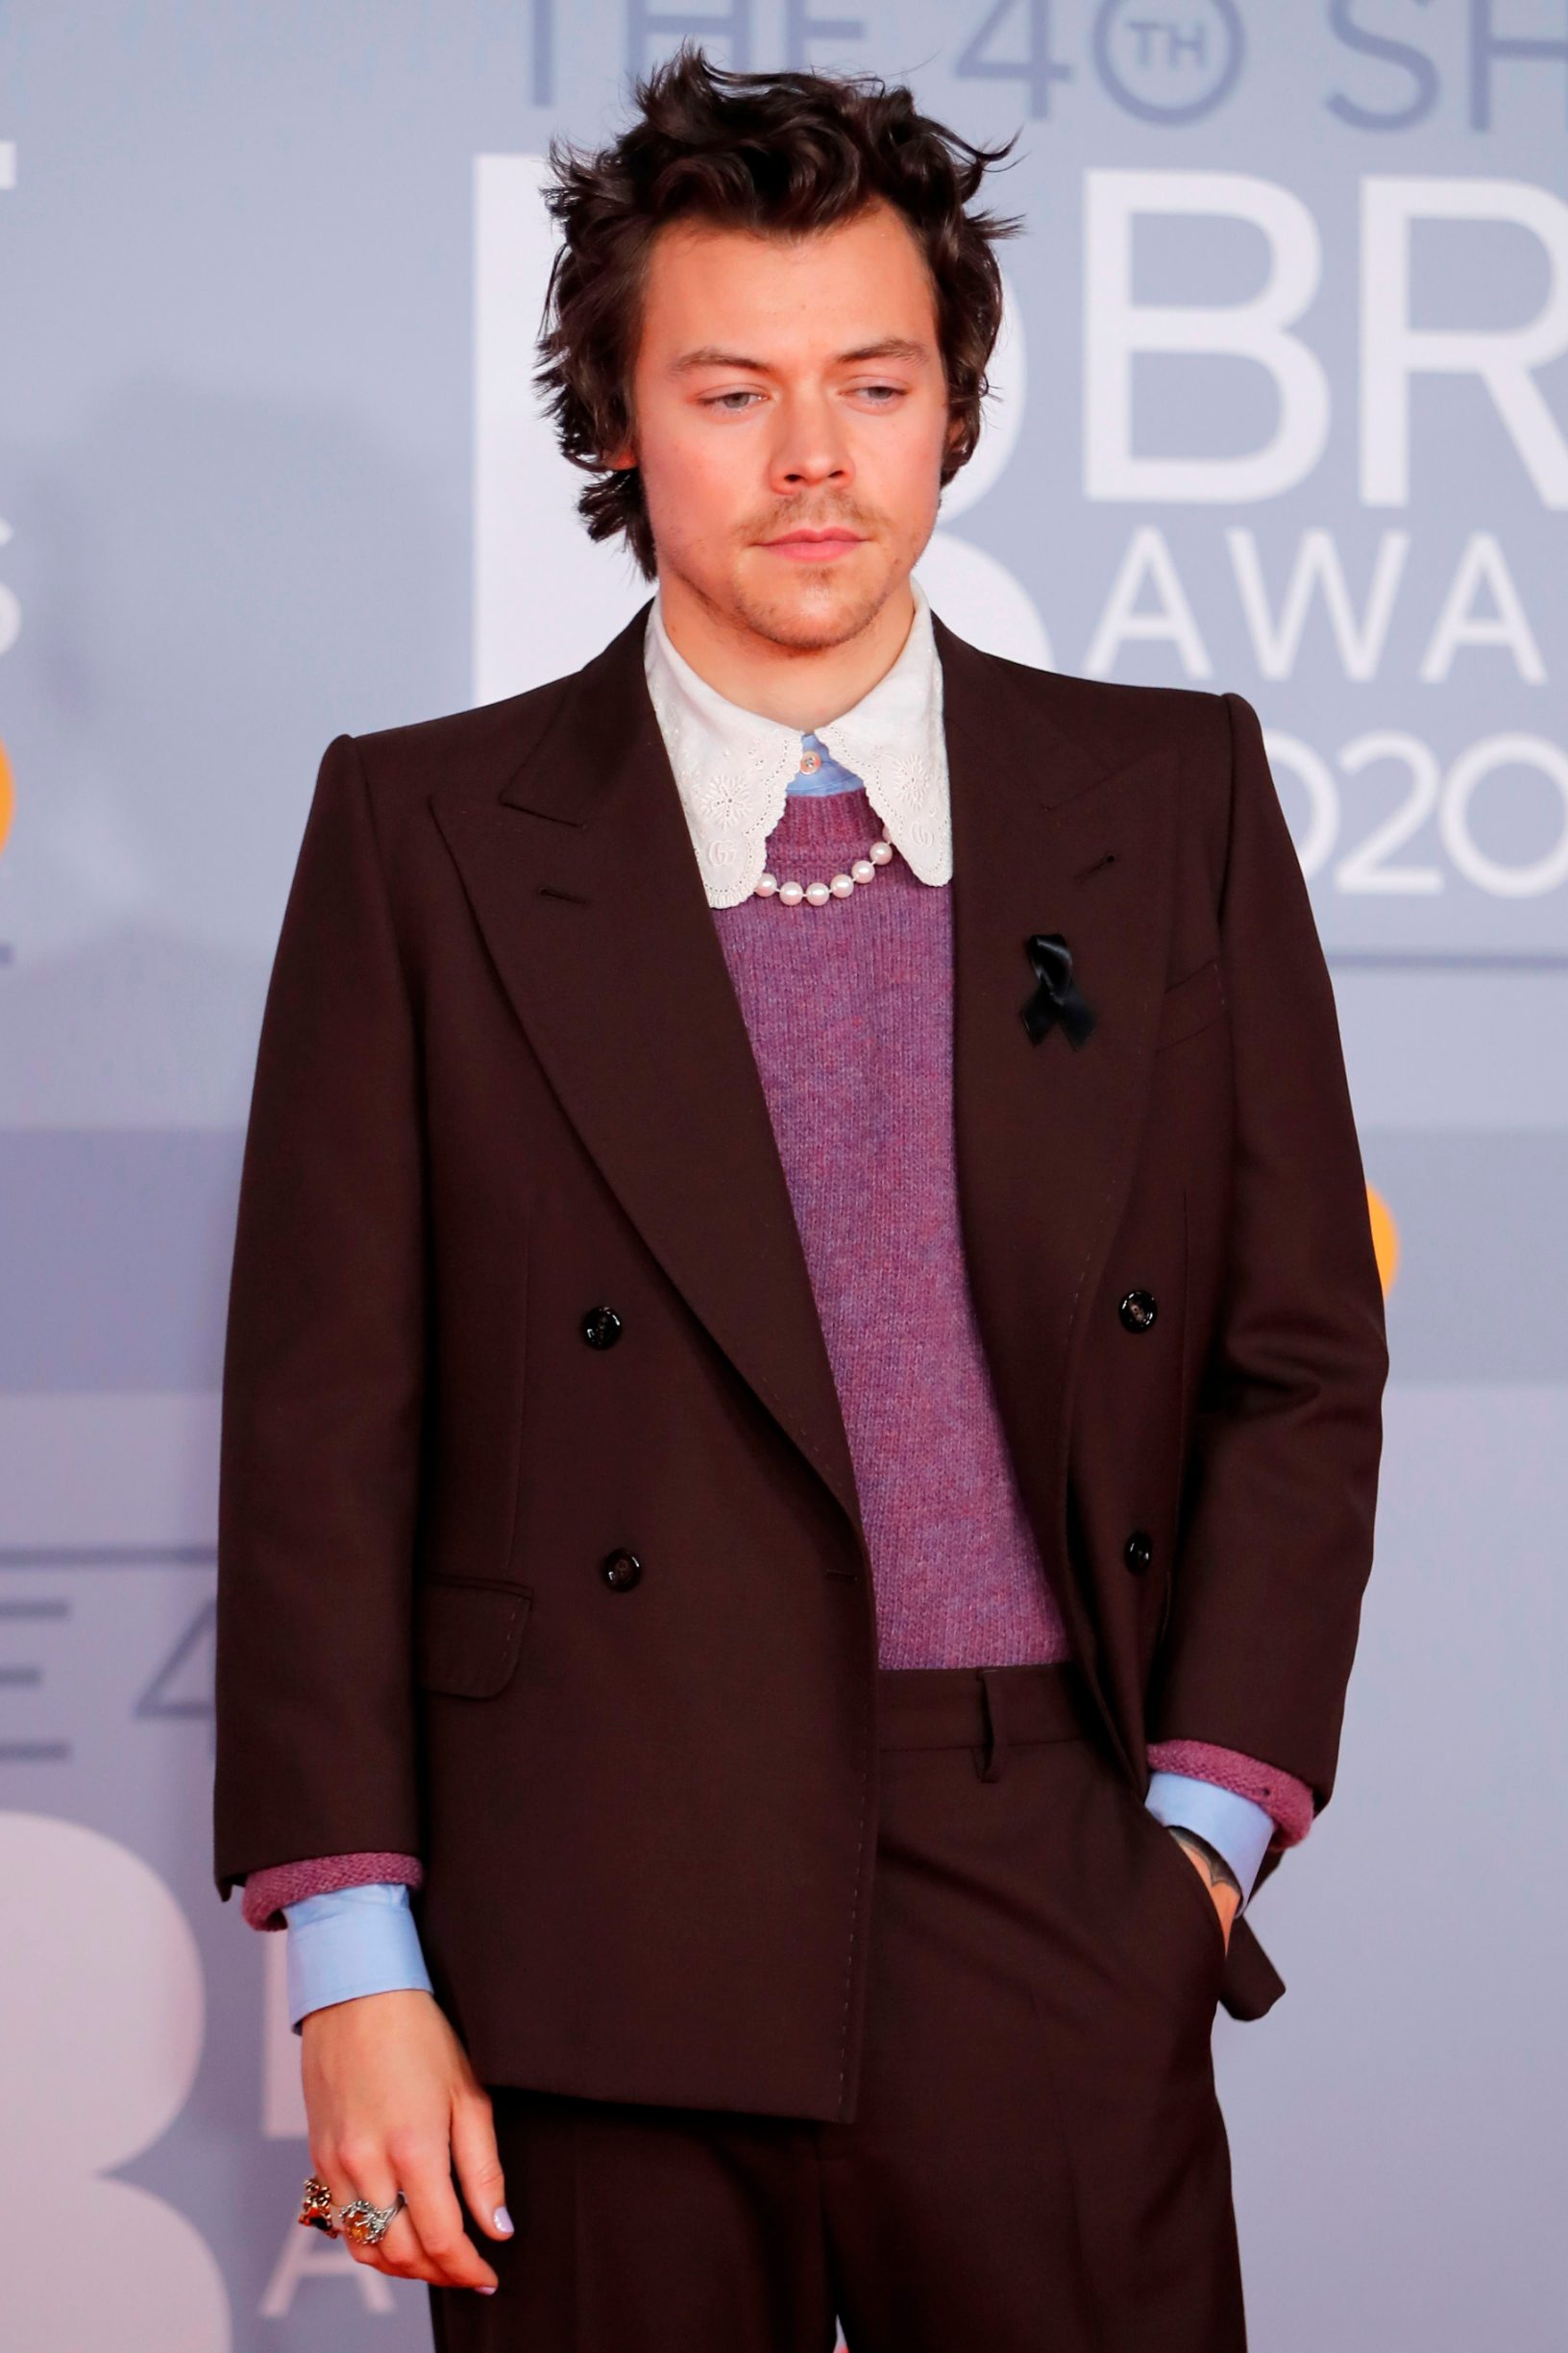 British singer-songwriter Harry Styles poses on the red carpet on arrival for the BRIT Awards 2020 in London on February 18, 2020. (Photo by Tolga AKMEN / AFP) / RESTRICTED TO EDITORIAL USE  NO POSTERS  NO MERCHANDISE NO USE IN PUBLICATIONS DEVOTED TO ARTISTS